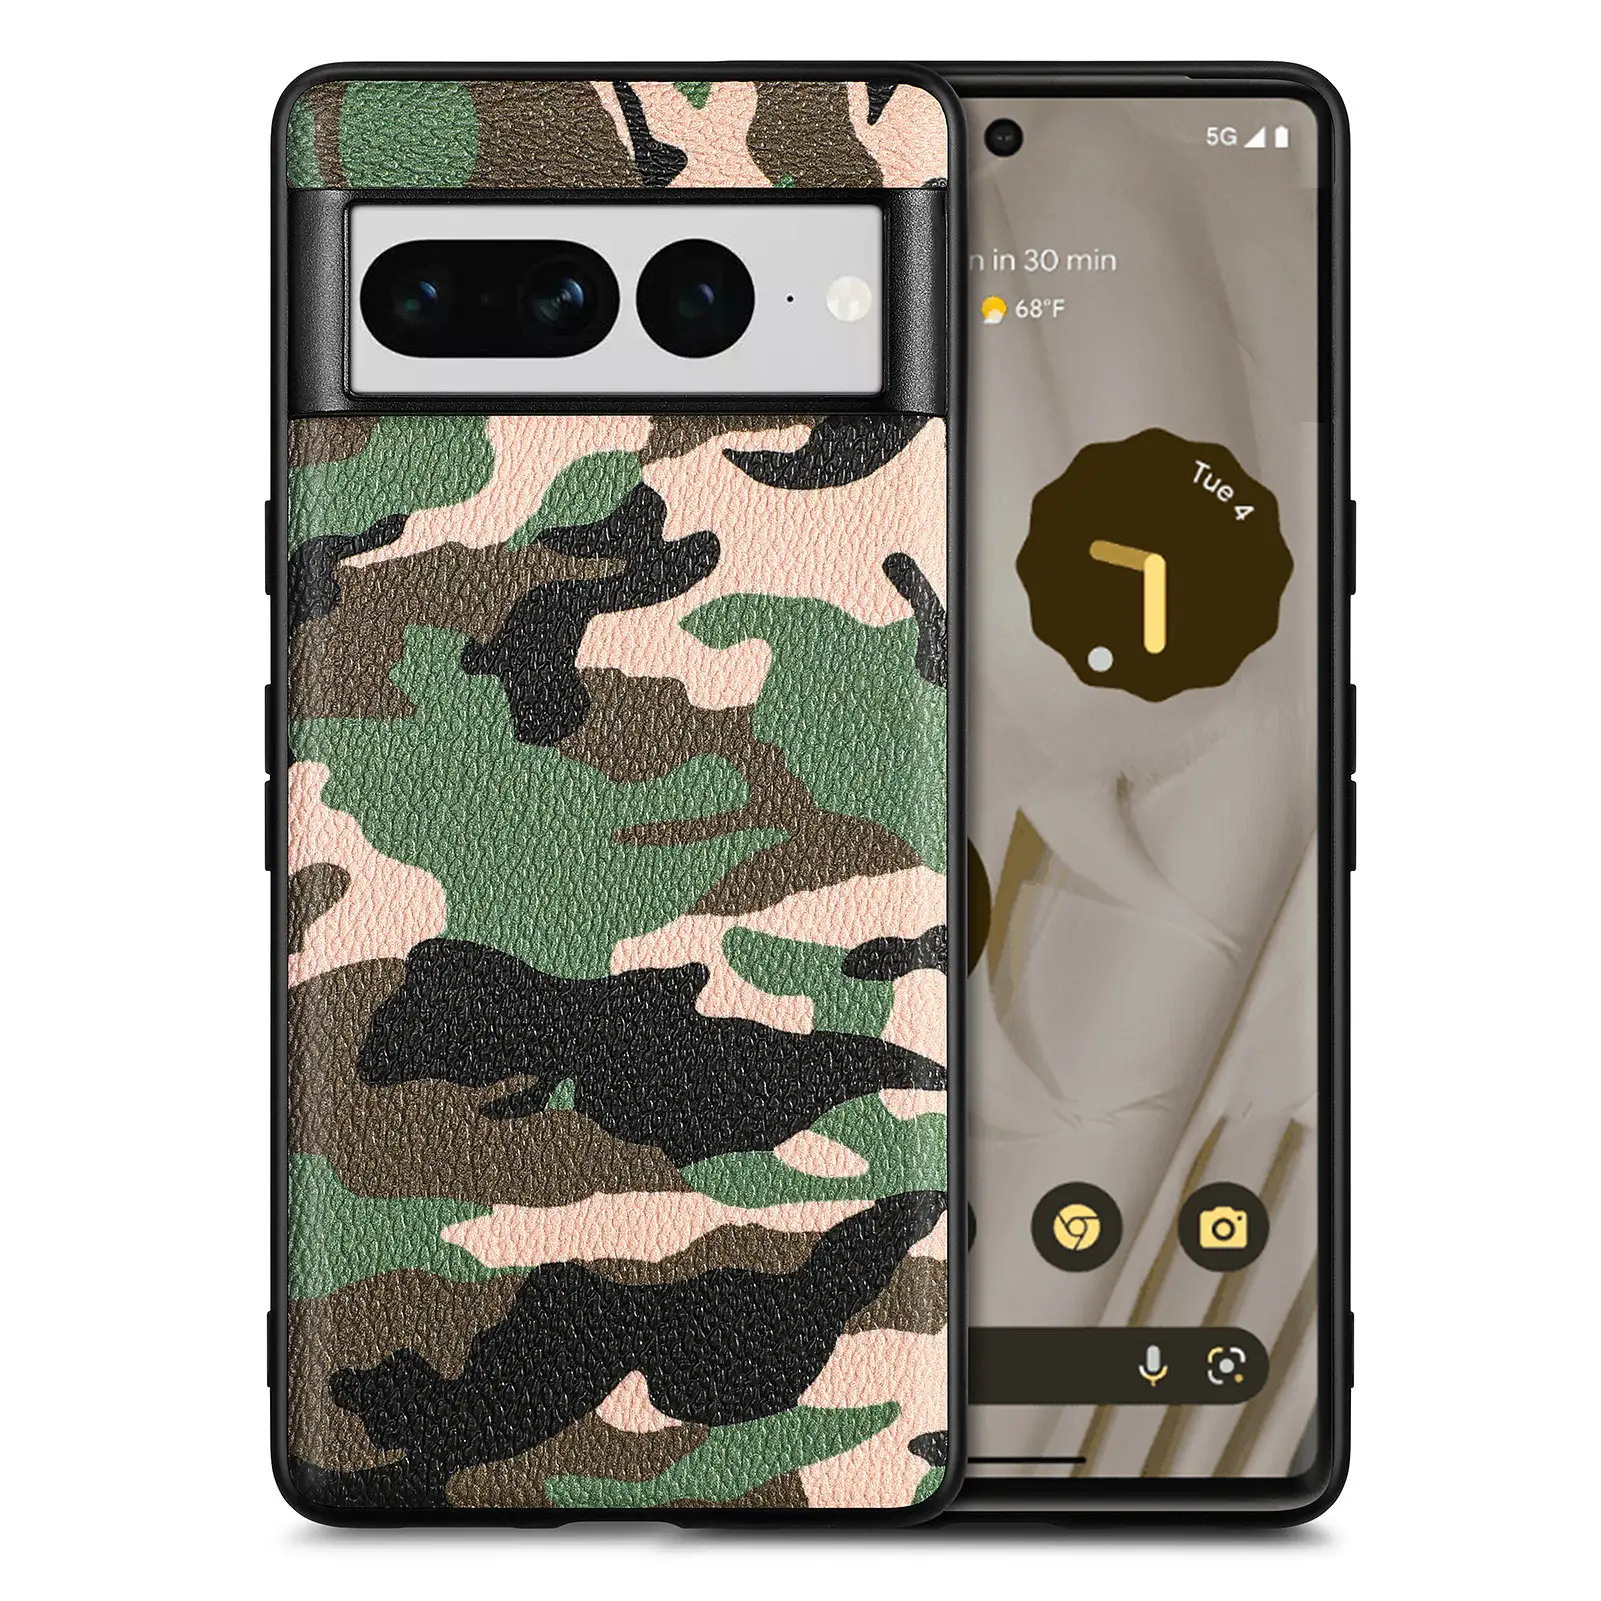 2-in-1 material hard shell shatter-resistant Lens Protection Back Shell camouflage phone case For iphone Google Pixel 7 Cover